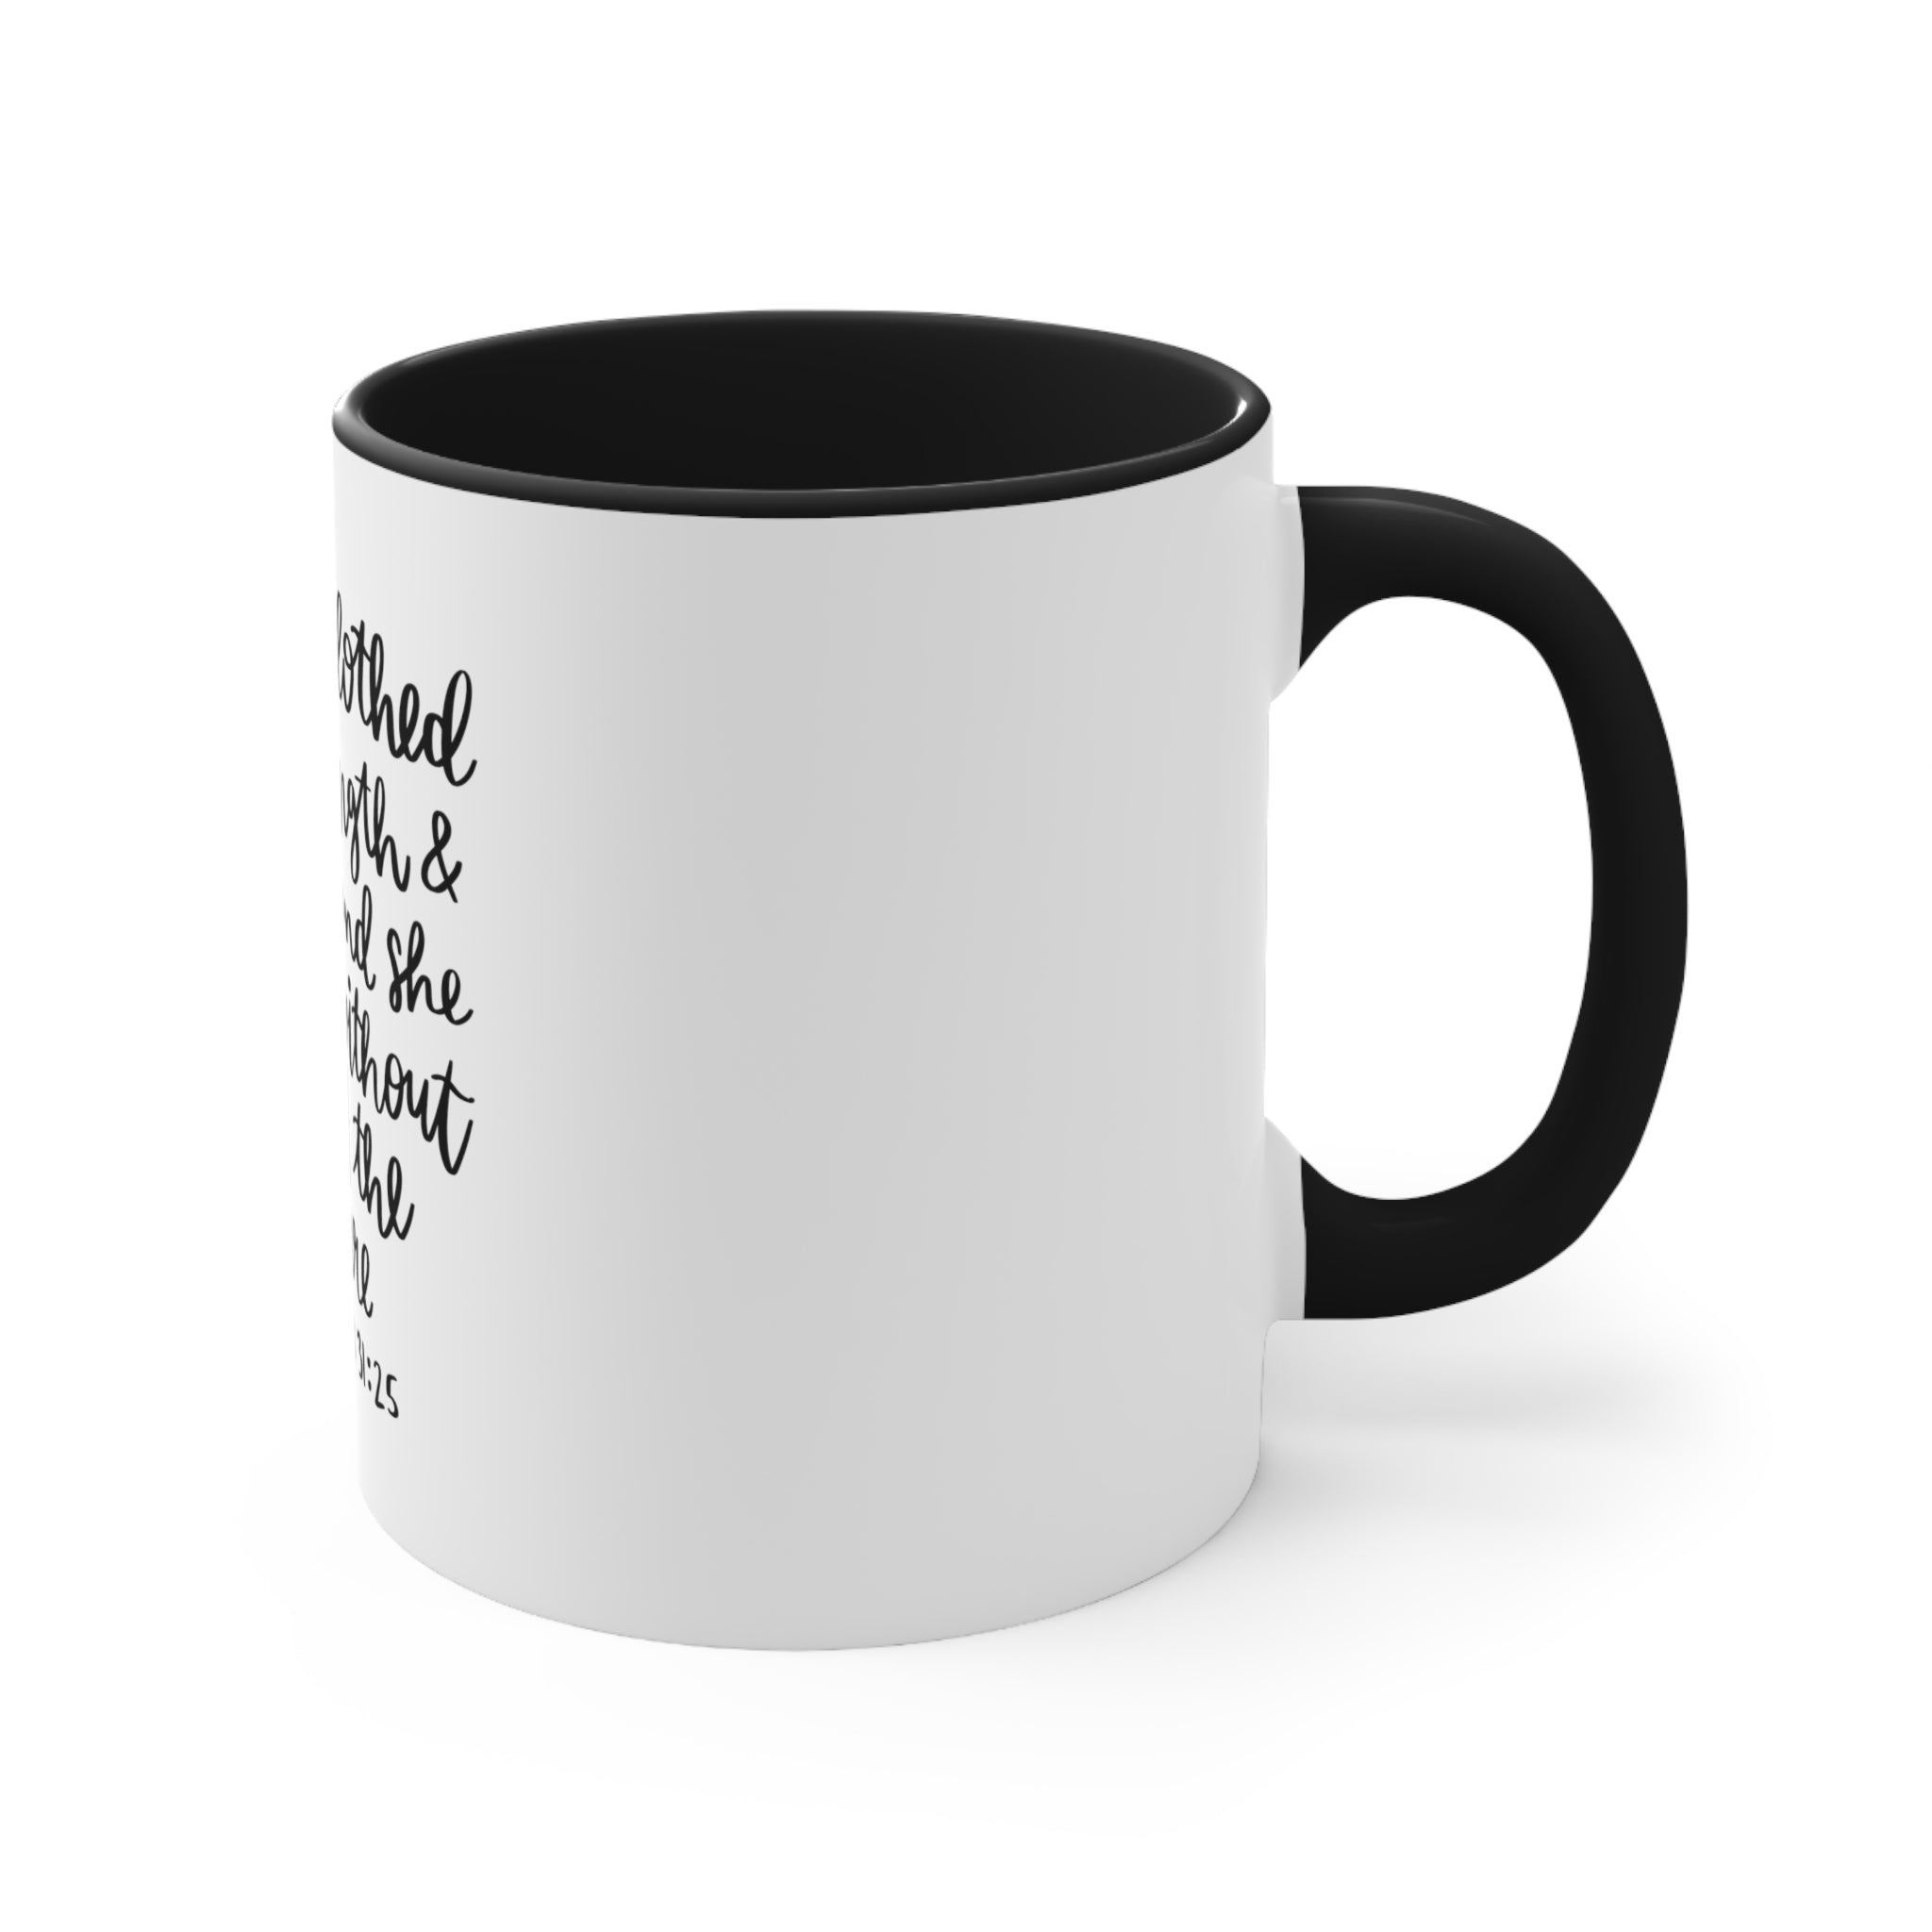 She Is Clothed In Strength Accent Coffee Mug, 11oz